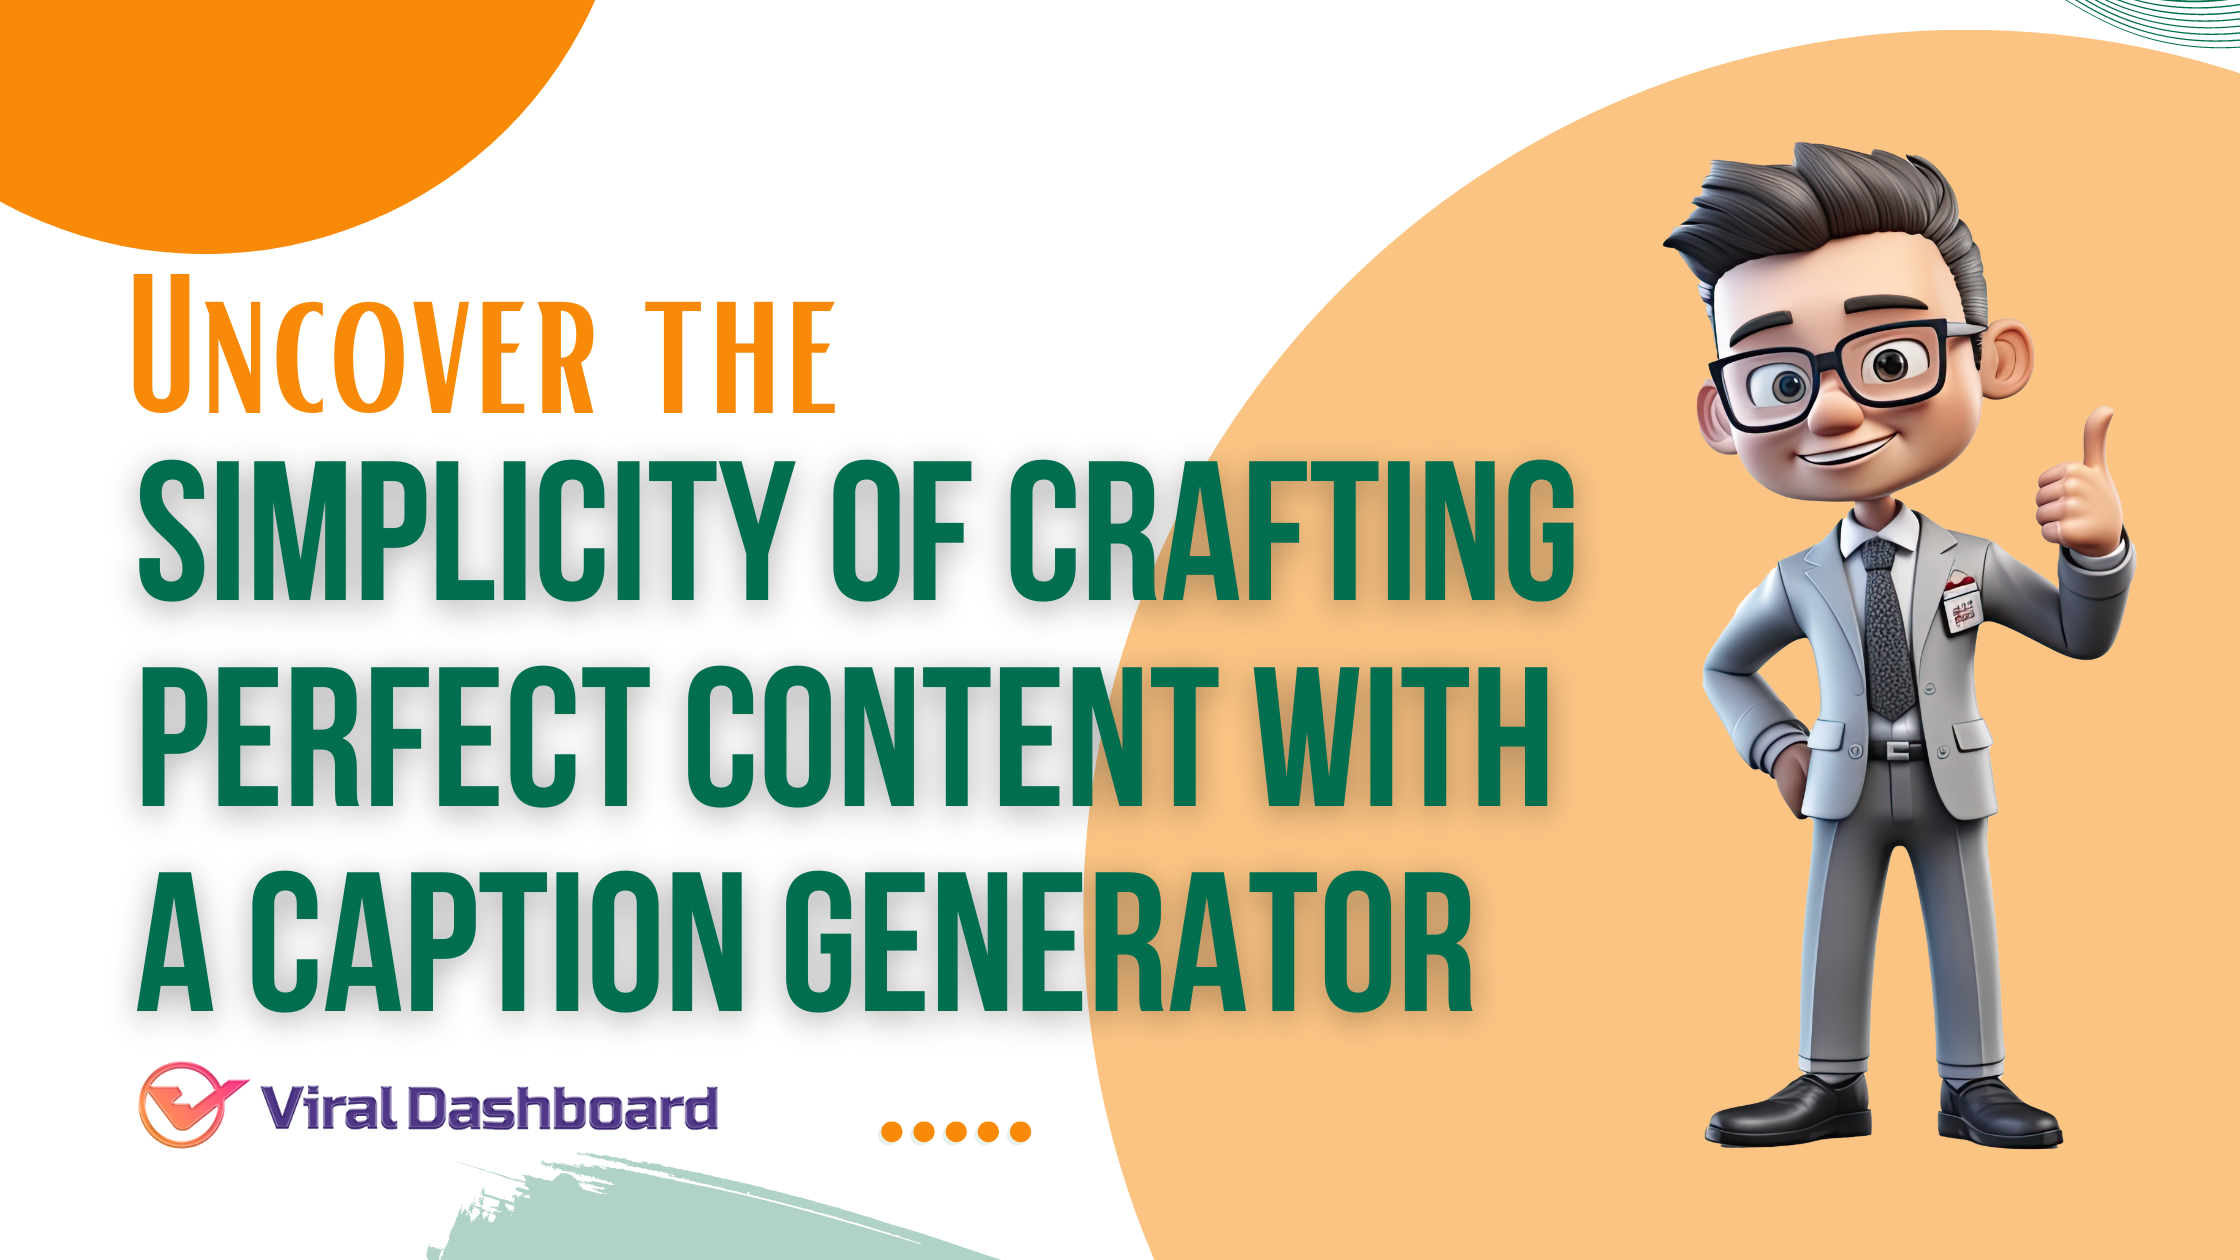 Uncover the Simplicity of Crafting Perfect Content with a Caption Generator